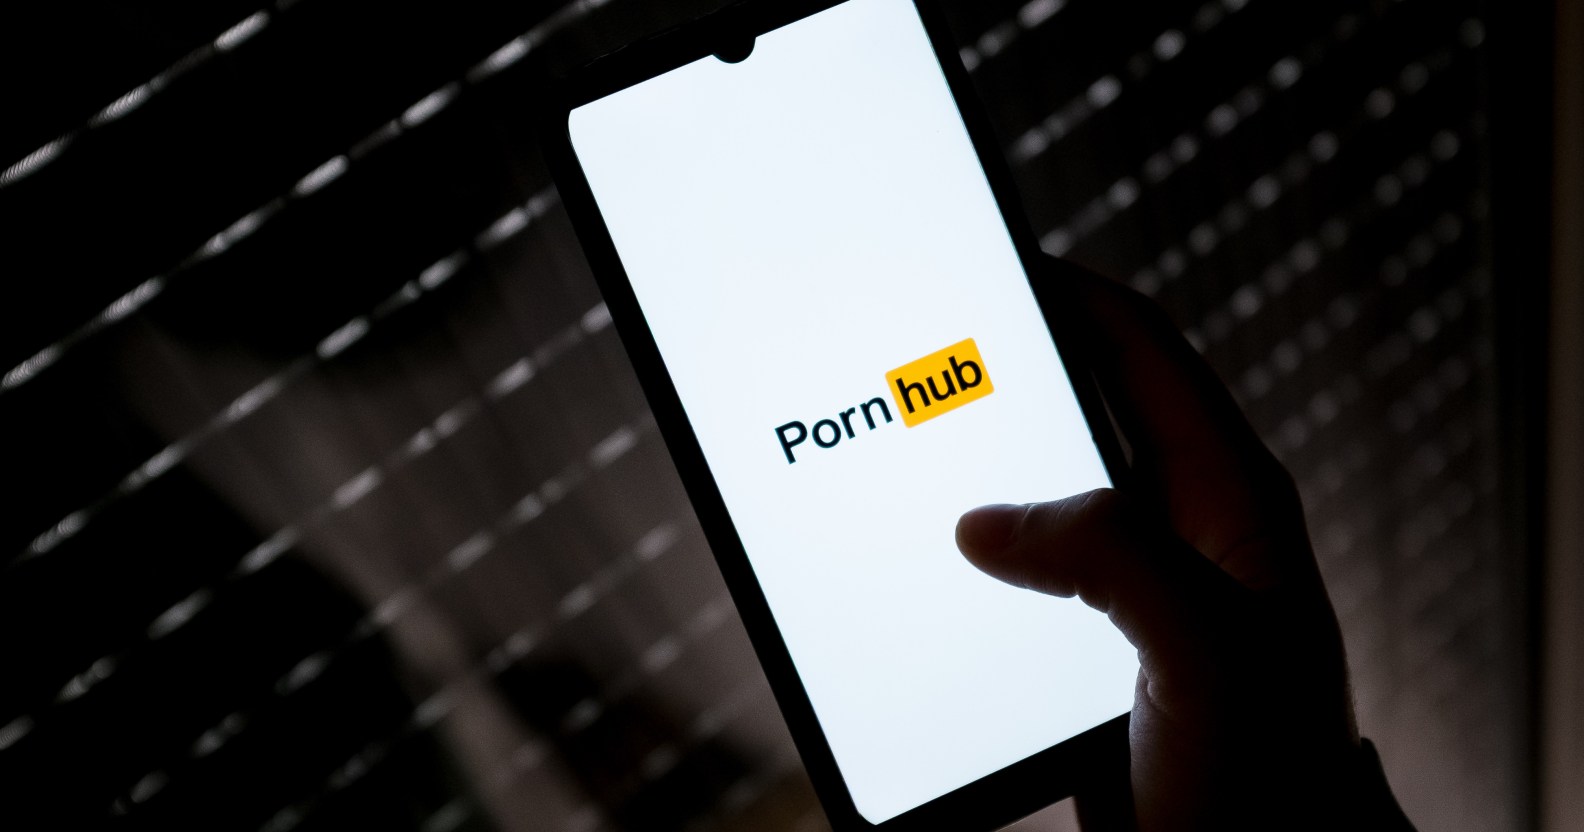 A photo shows a smartphone being held with the "PornHub" logo on a white background